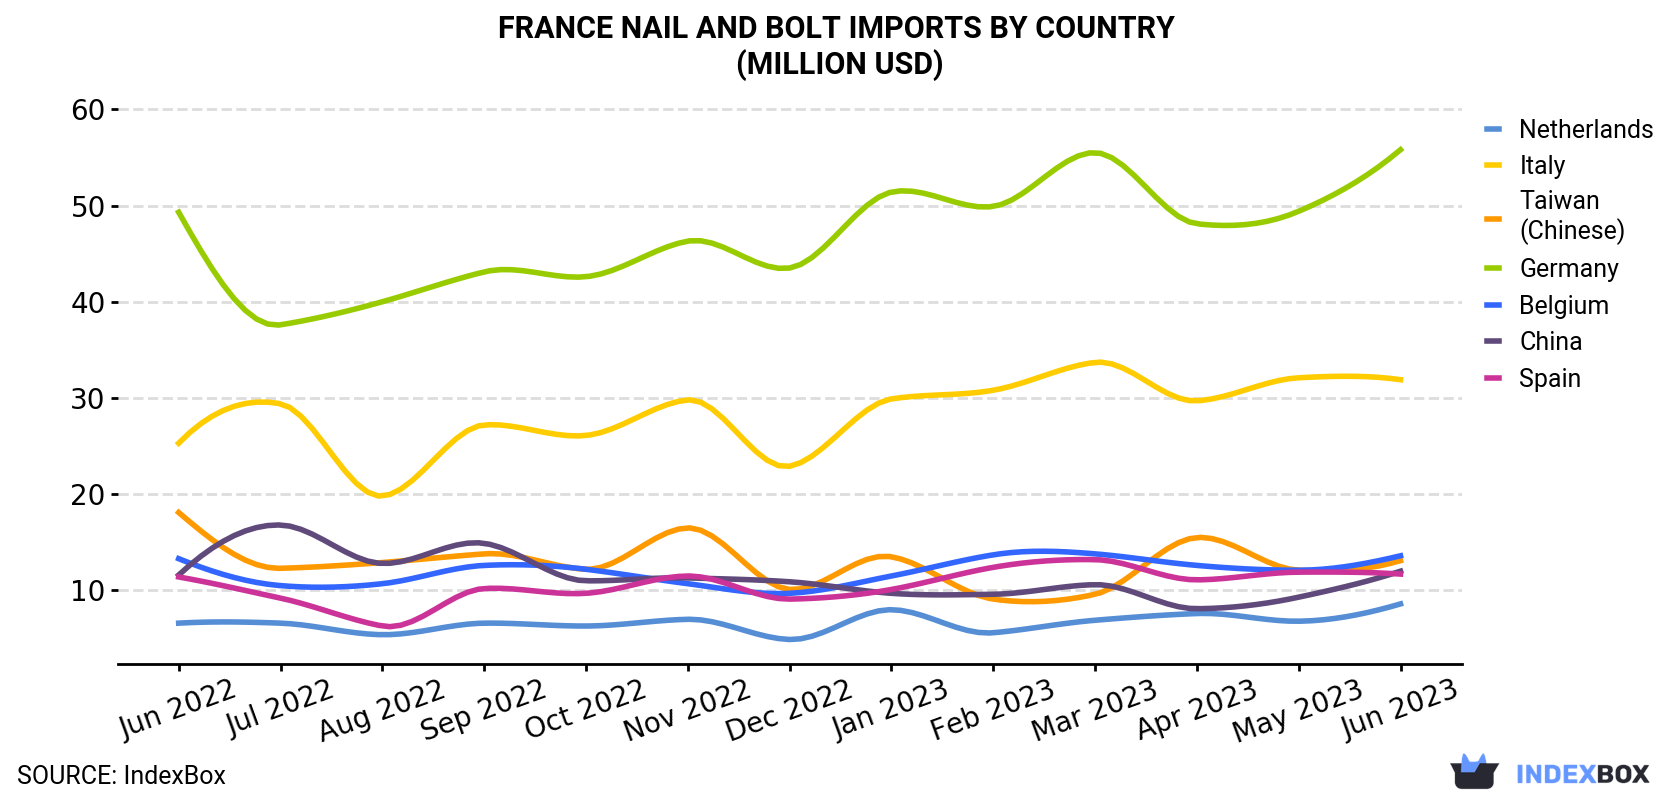 France Nail And Bolt Imports By Country (Million USD)